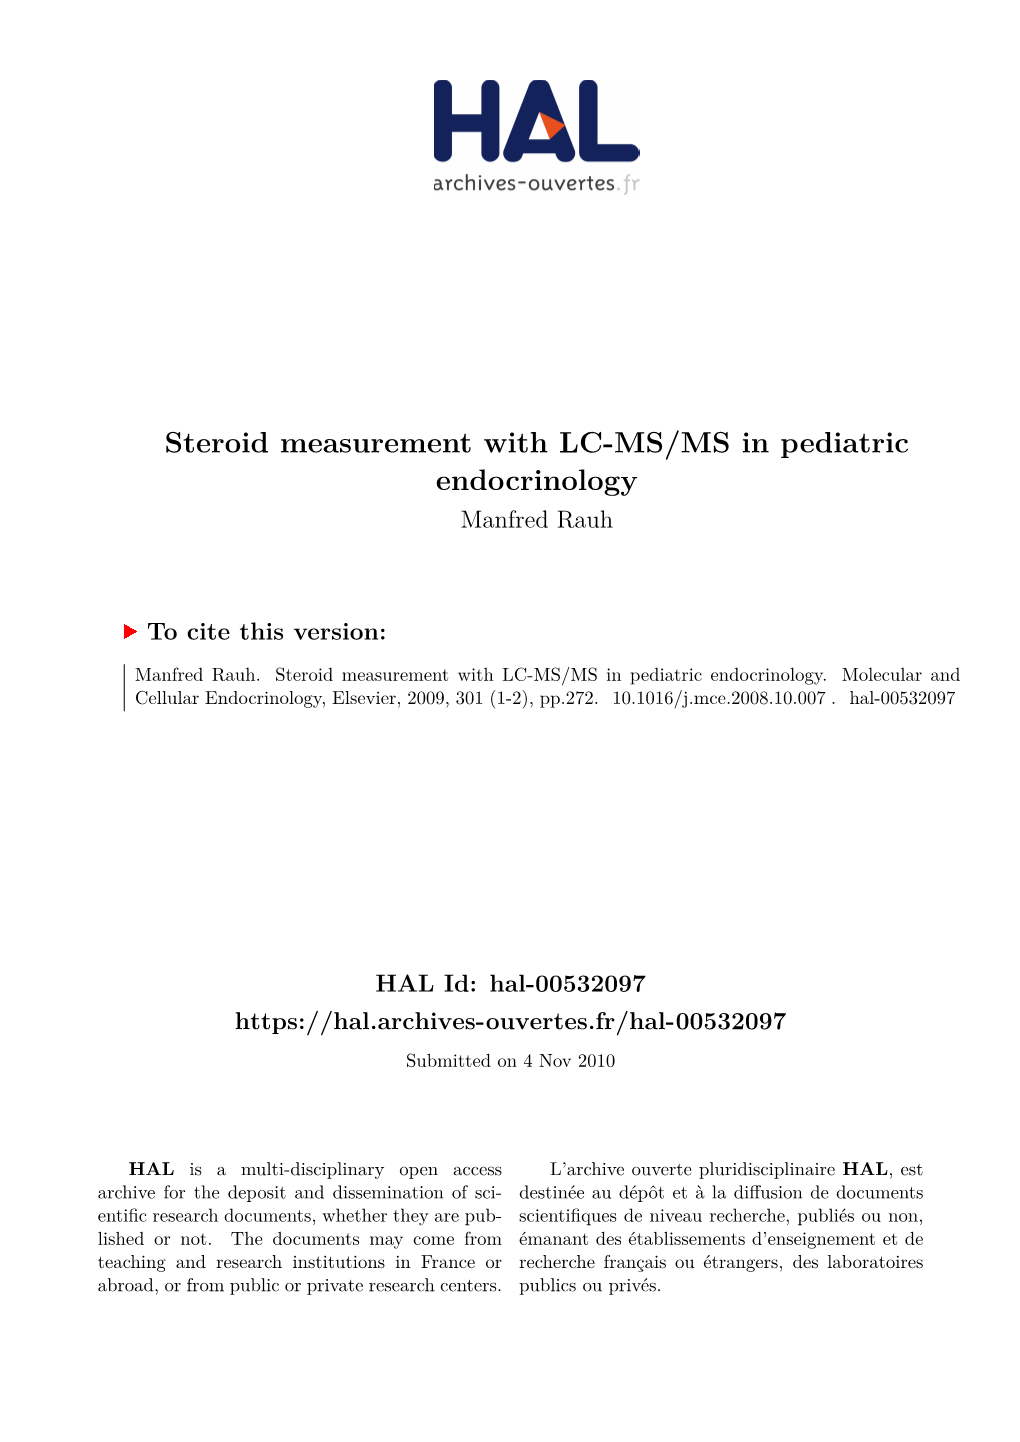 Steroid Measurement with LC-MS/MS in Pediatric Endocrinology Manfred Rauh